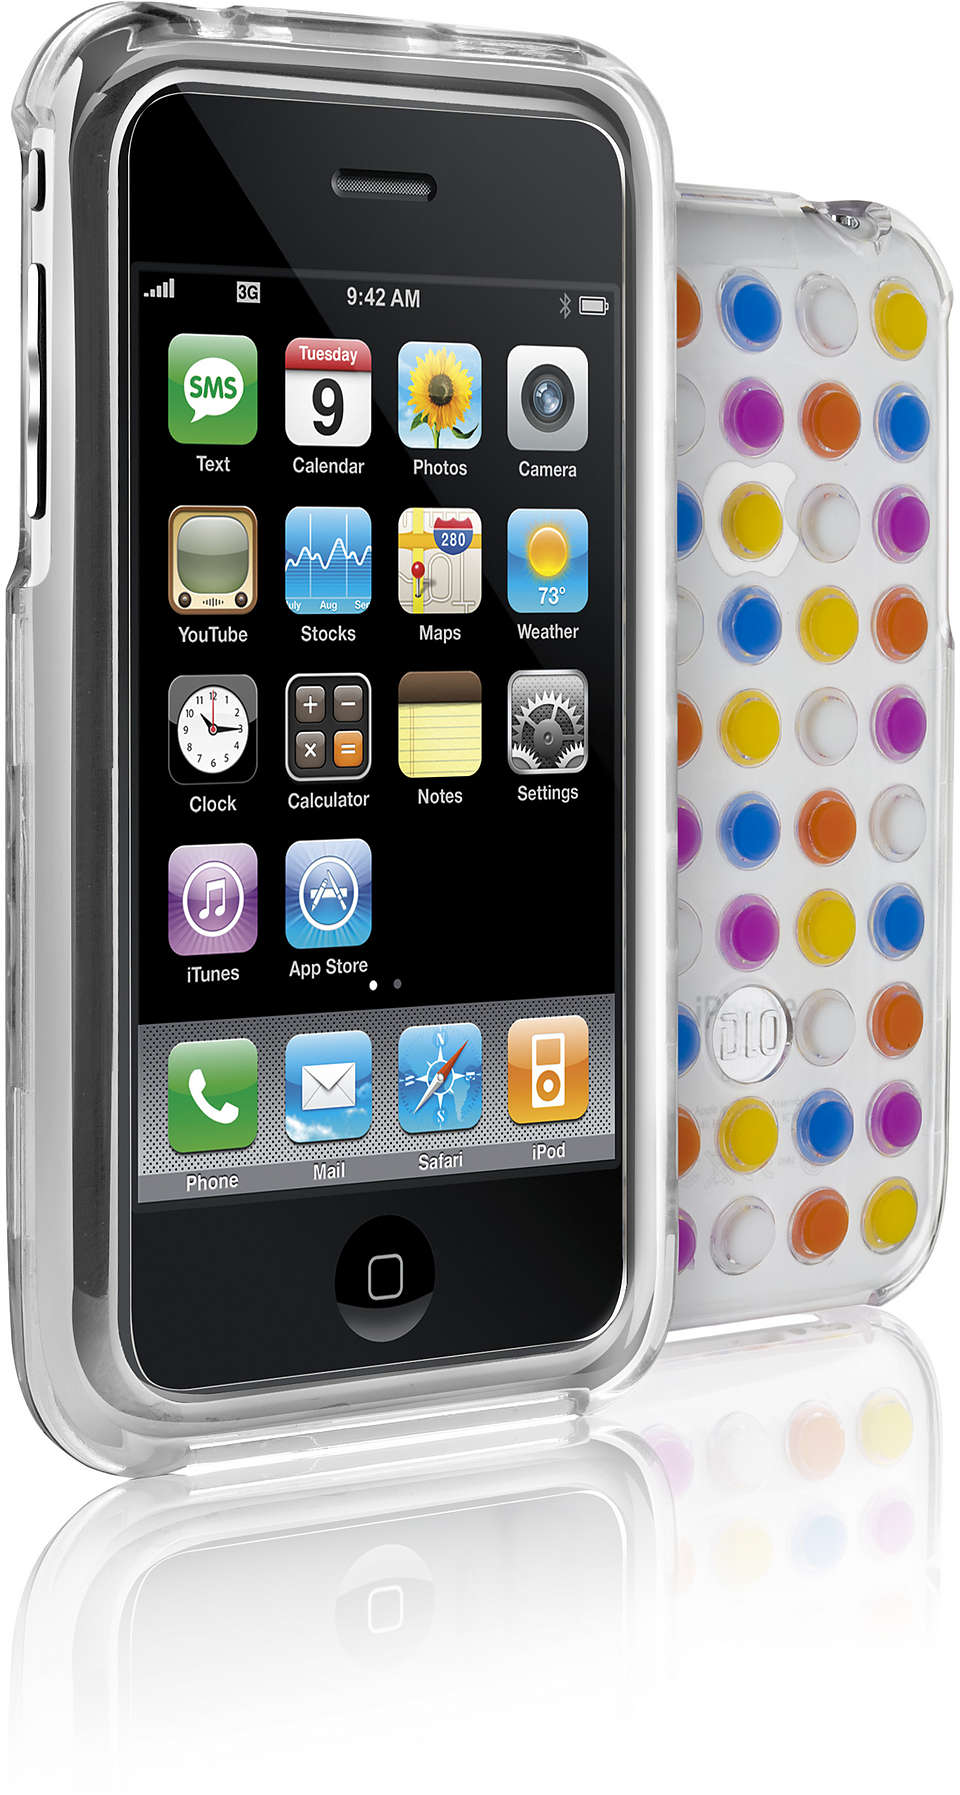 Protect your iPhone in a clear shell